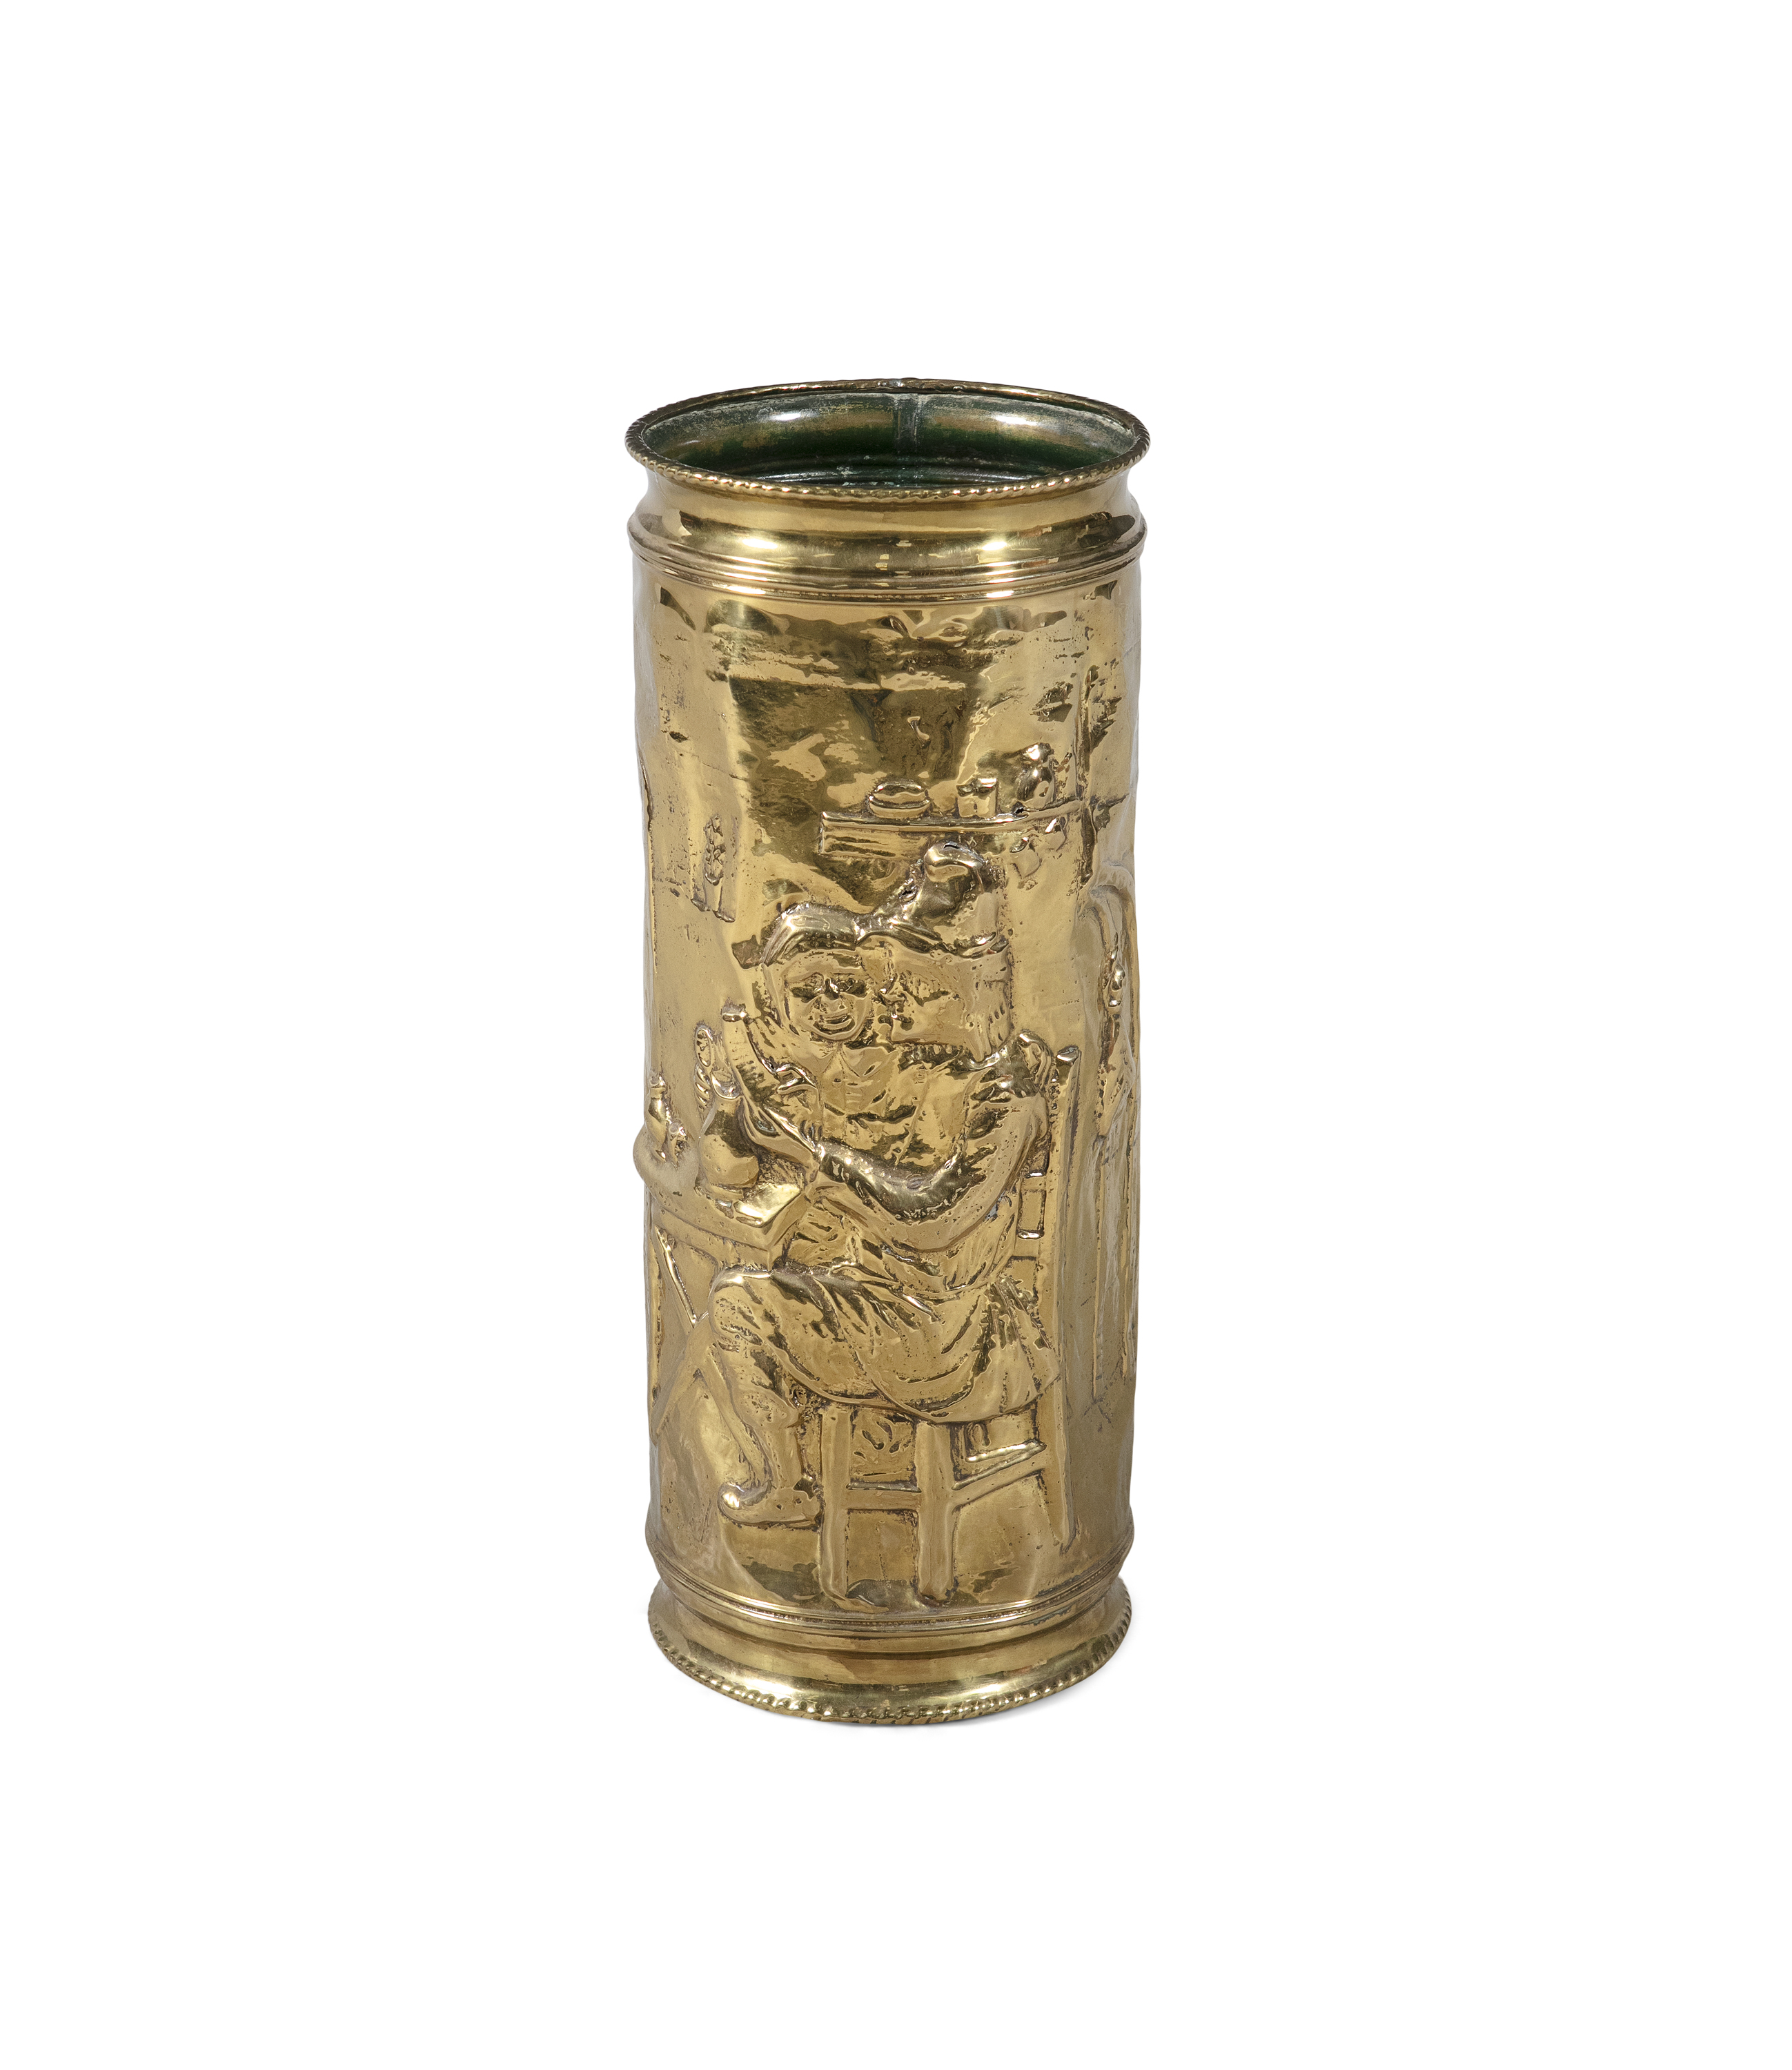 A BRASS CYLINDRICAL STICK STAND, with embossed figural decoration, in the manner of David Teniers.